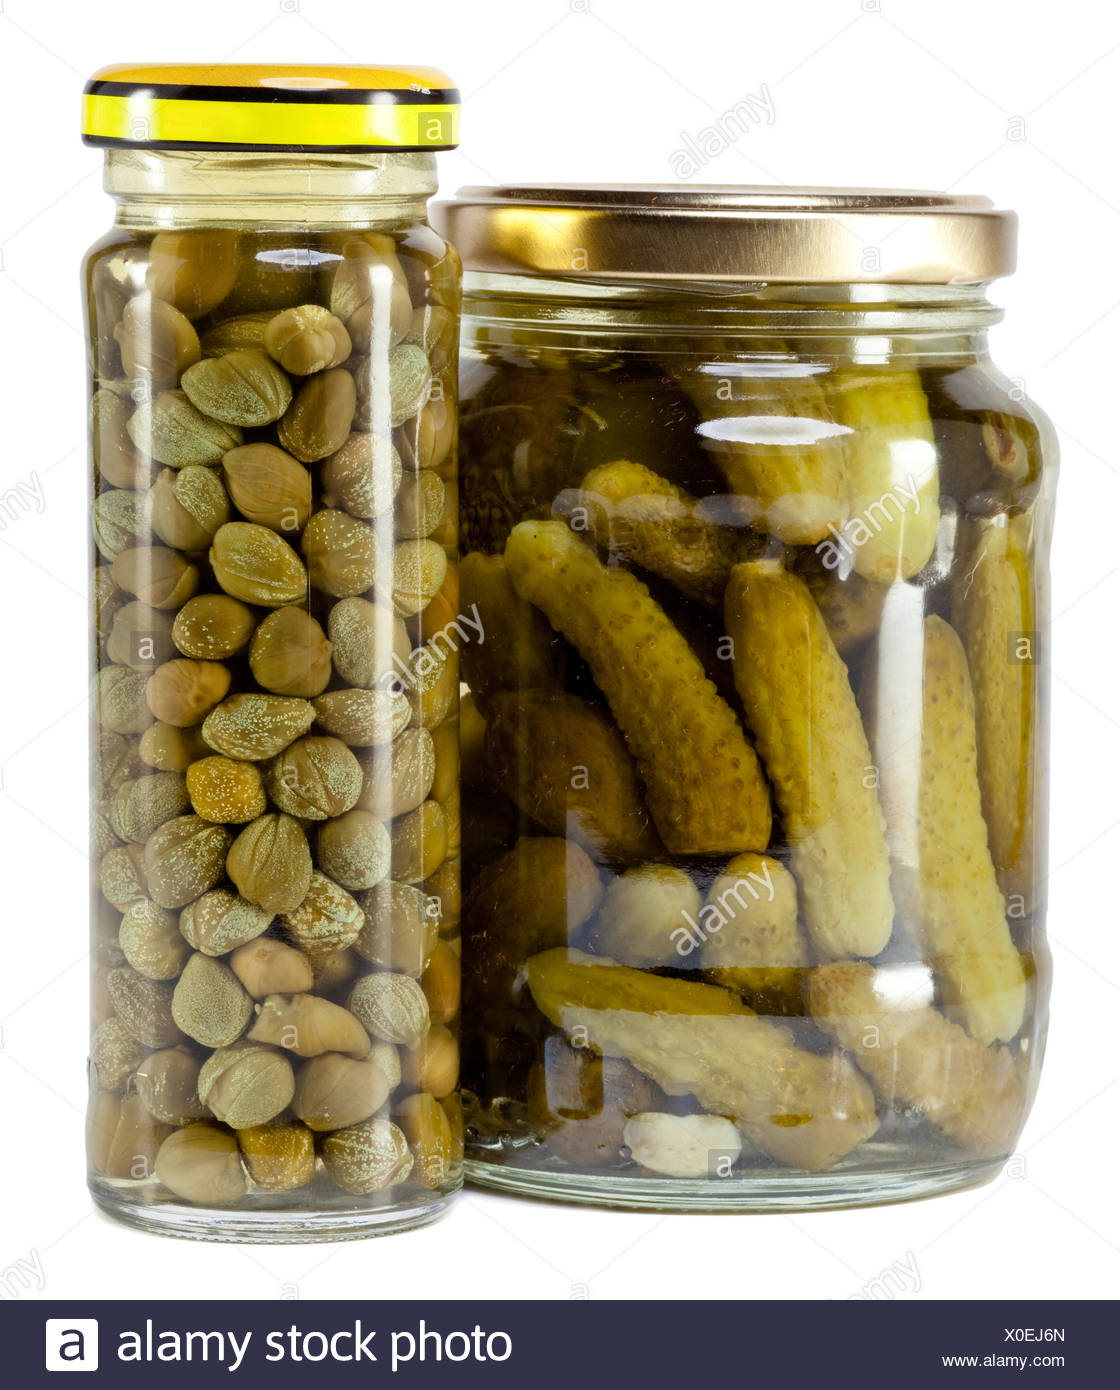 Download Glass Jar With Tinned Capers And Cucumbers Stock Photo Alamy Yellowimages Mockups